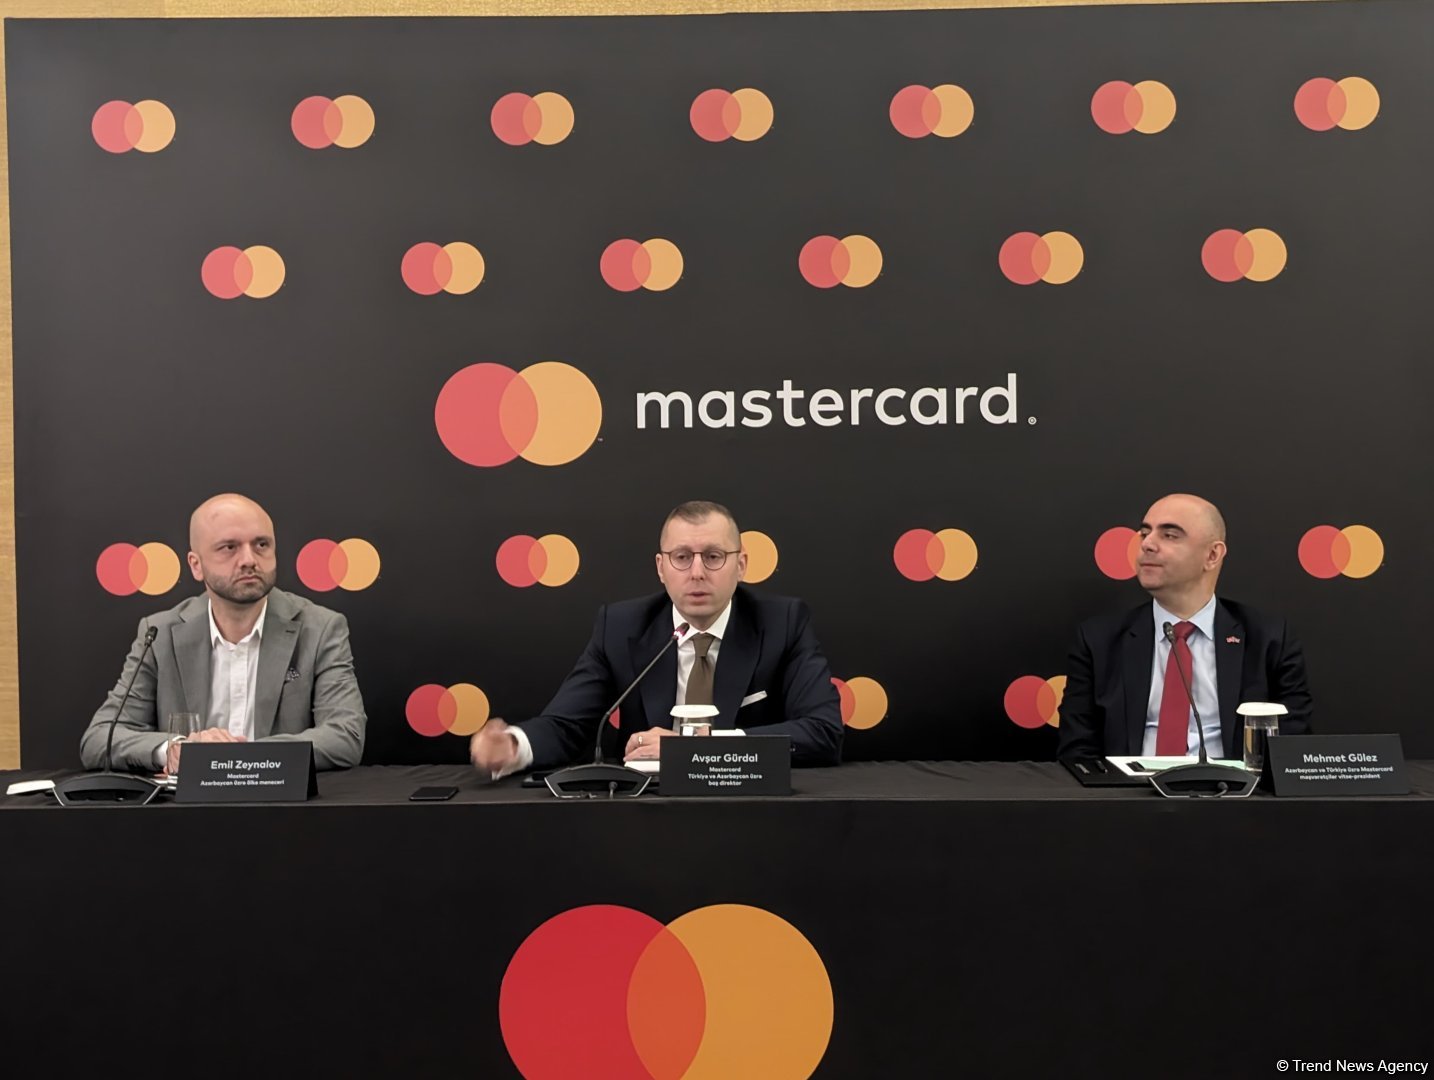 Azerbaijan's rate of tech adoption outpaces global average - Mastercard's CEO